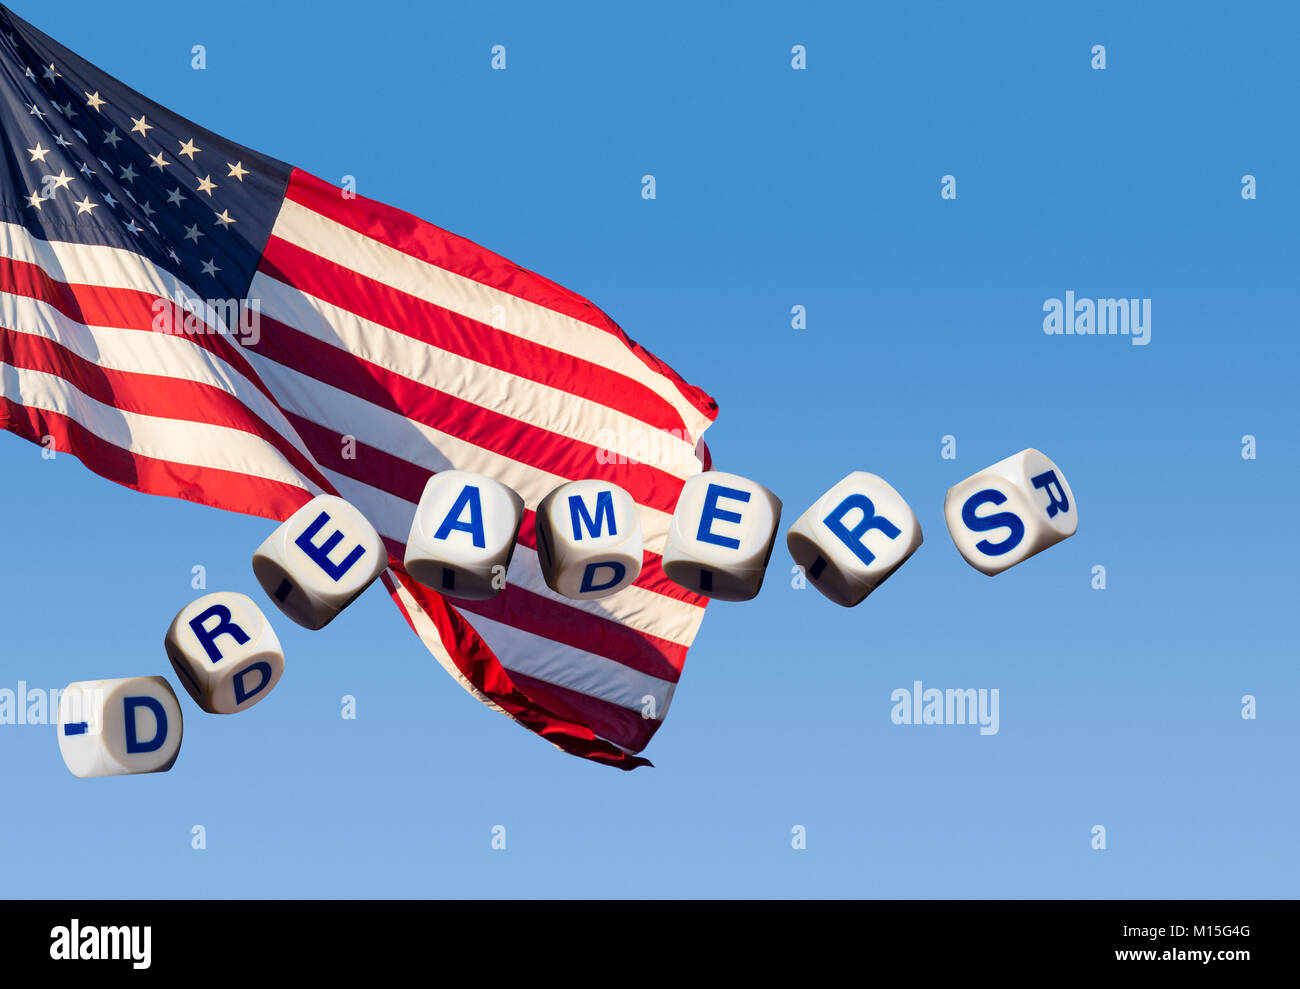 Dreamers concept using spelling letters against blue sky and flag Stock Photo